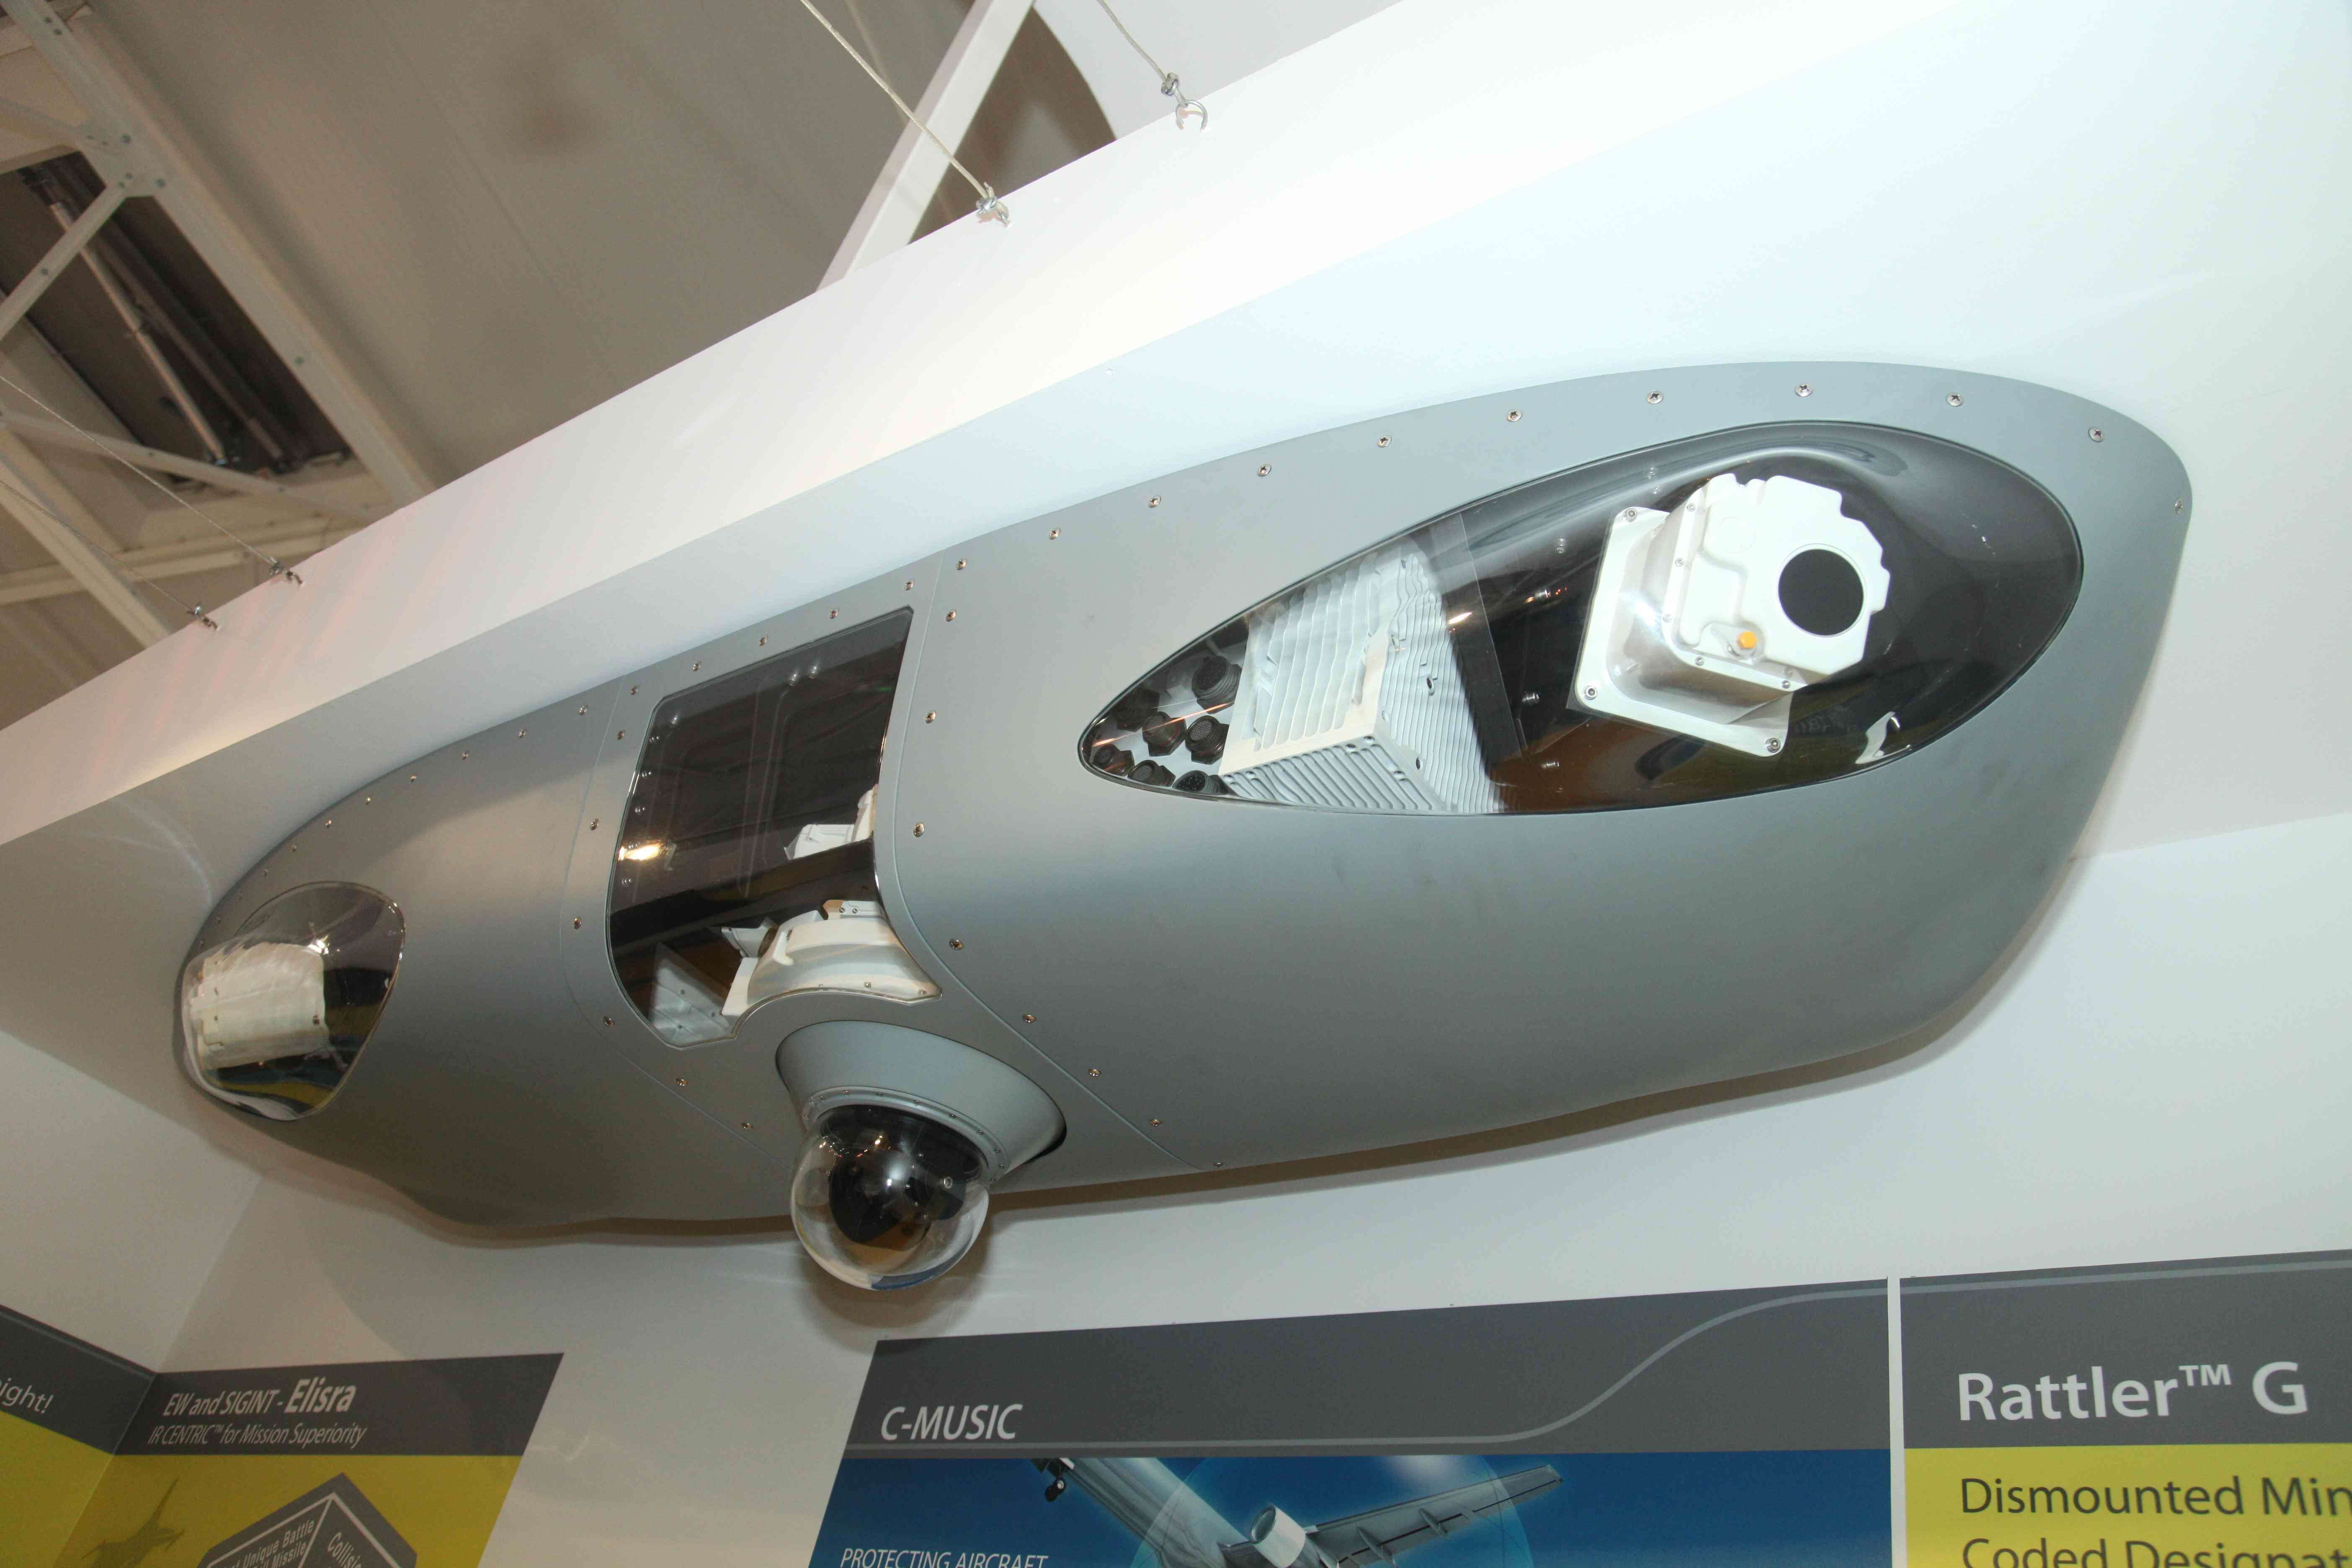 The C-MUSIC system for protecting passenger planes against shoulder-fired missiles at the Paris Air Show 2011. Photo: Assaf Shilo Israel Sun,